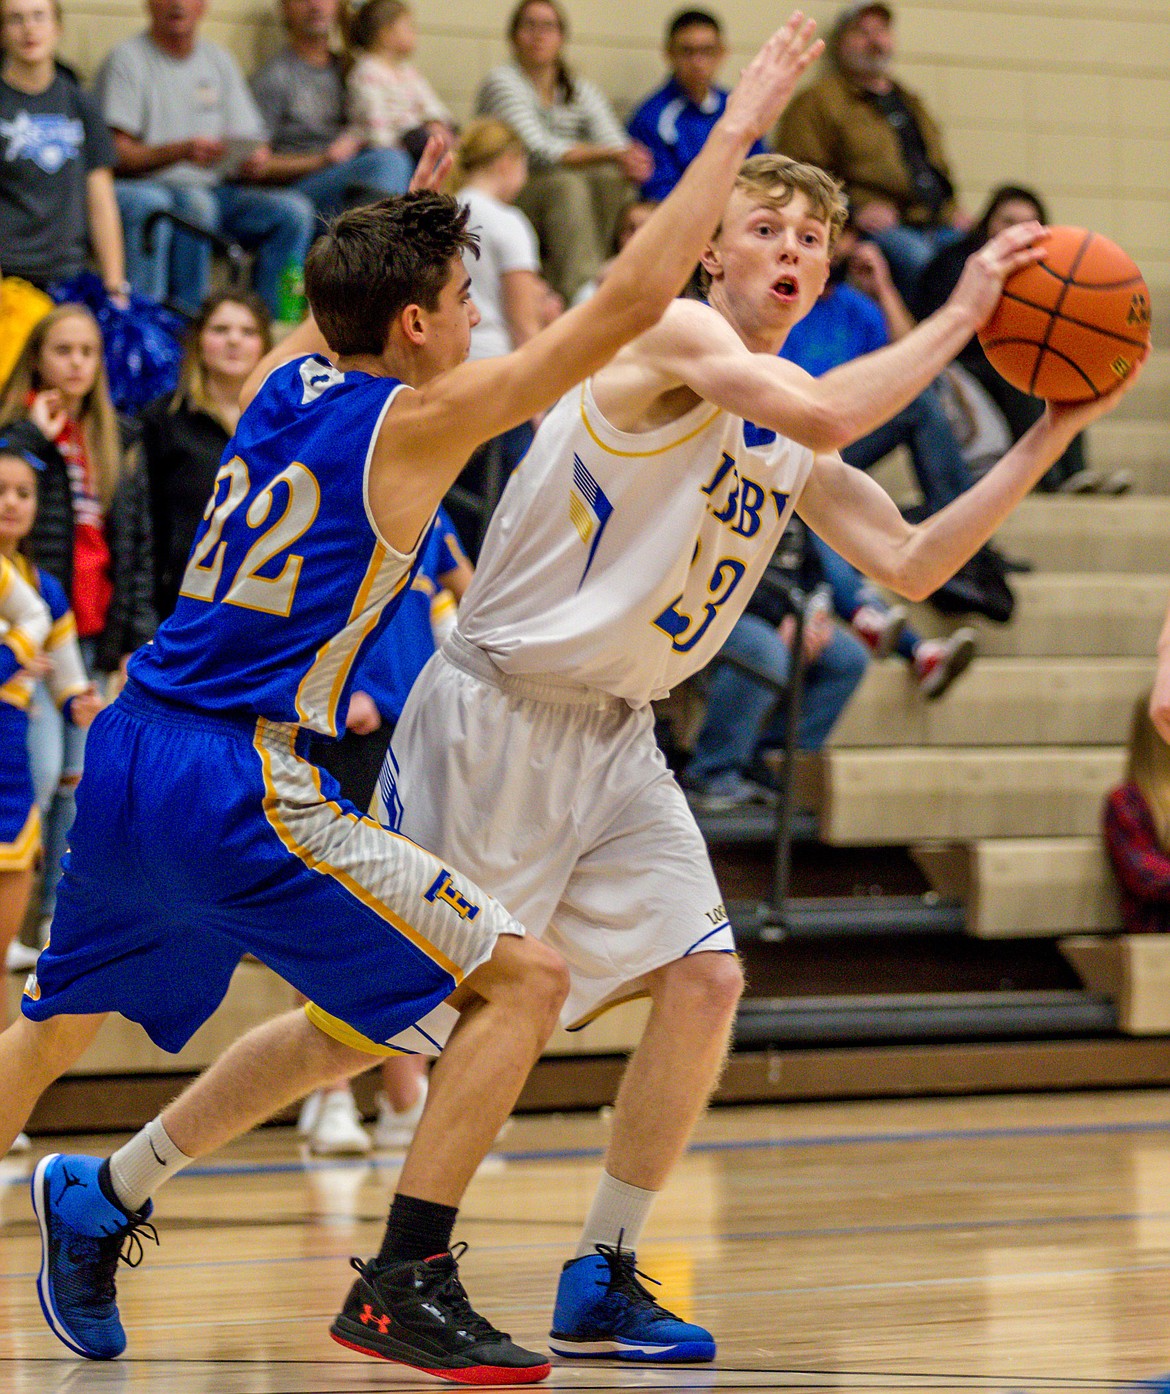 Libby&#146;s Ryggs Johnston, right, looks for an open teammate while guarded by Thompson Falls&#146; Alex Erosa during the first quarter Saturday. (John Blodgett/The Western News)